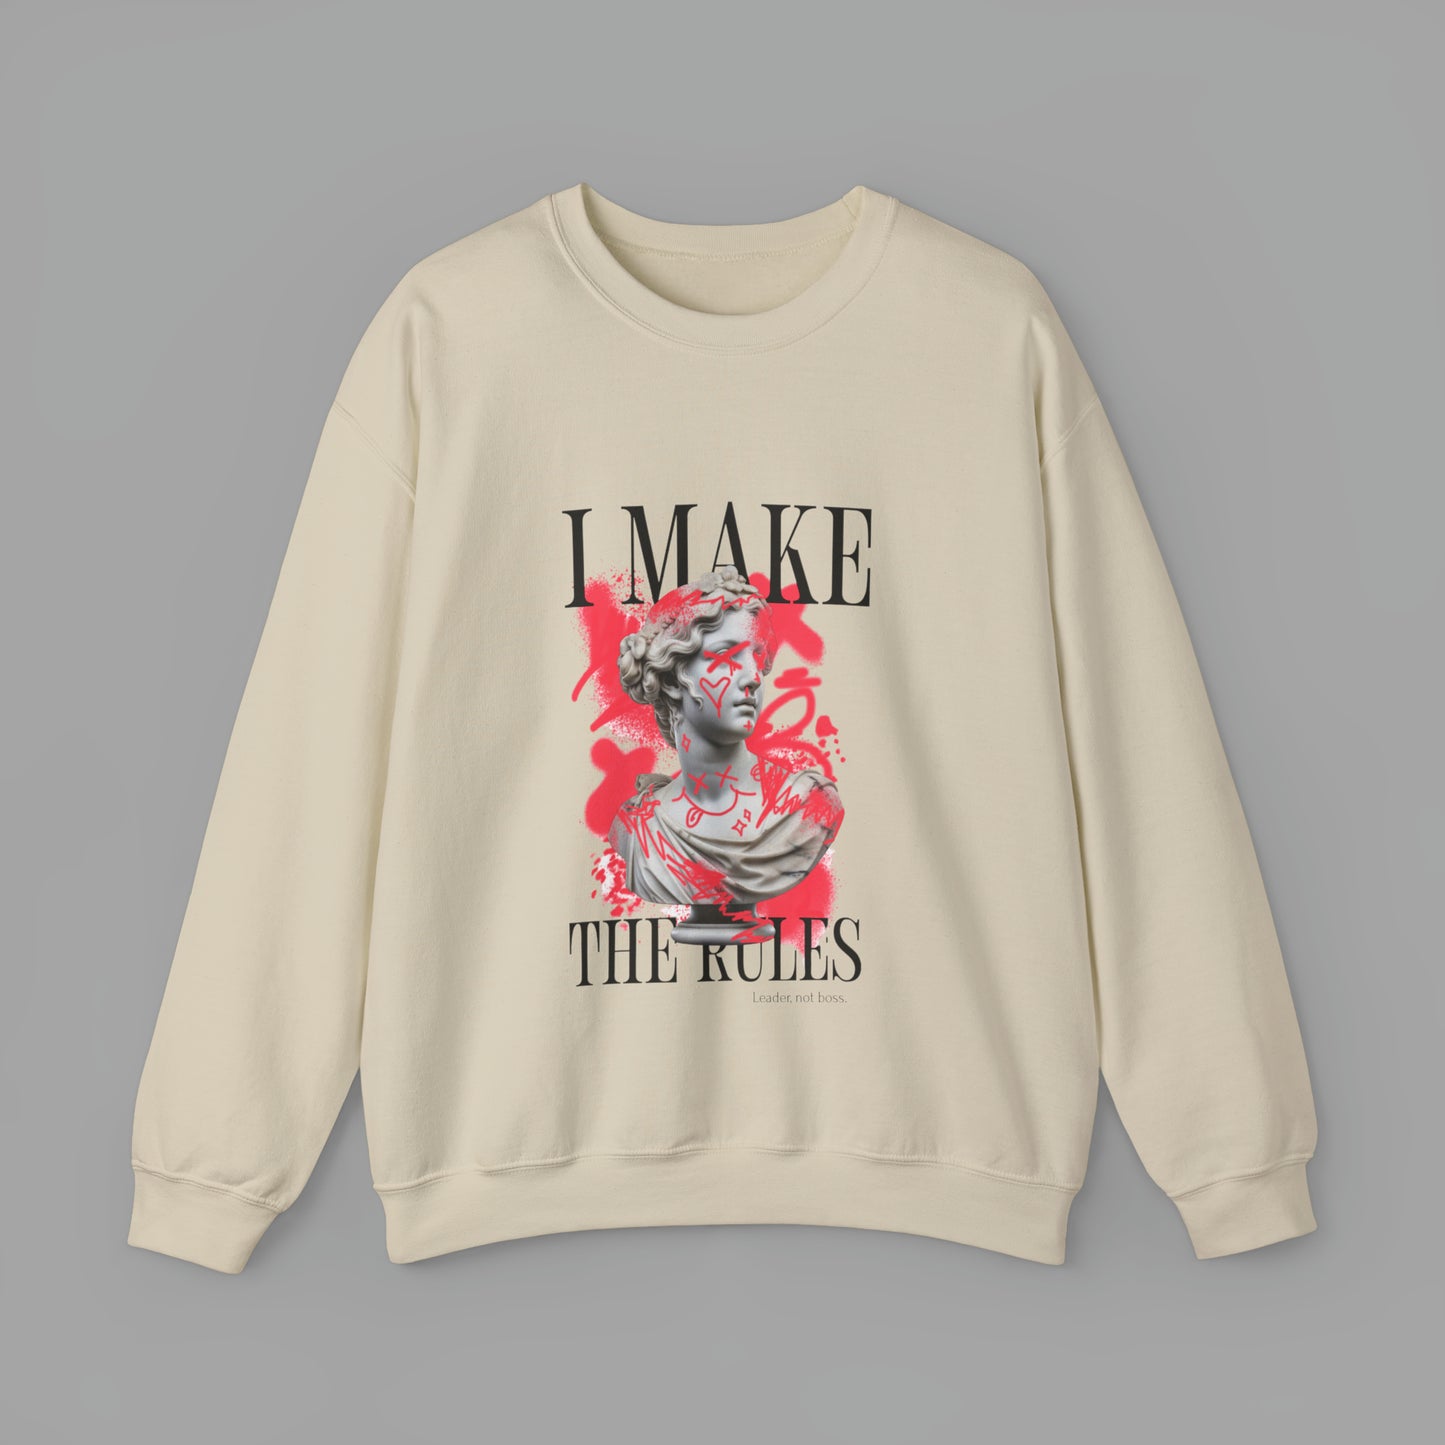 I MAKE THE RULLES Pullover